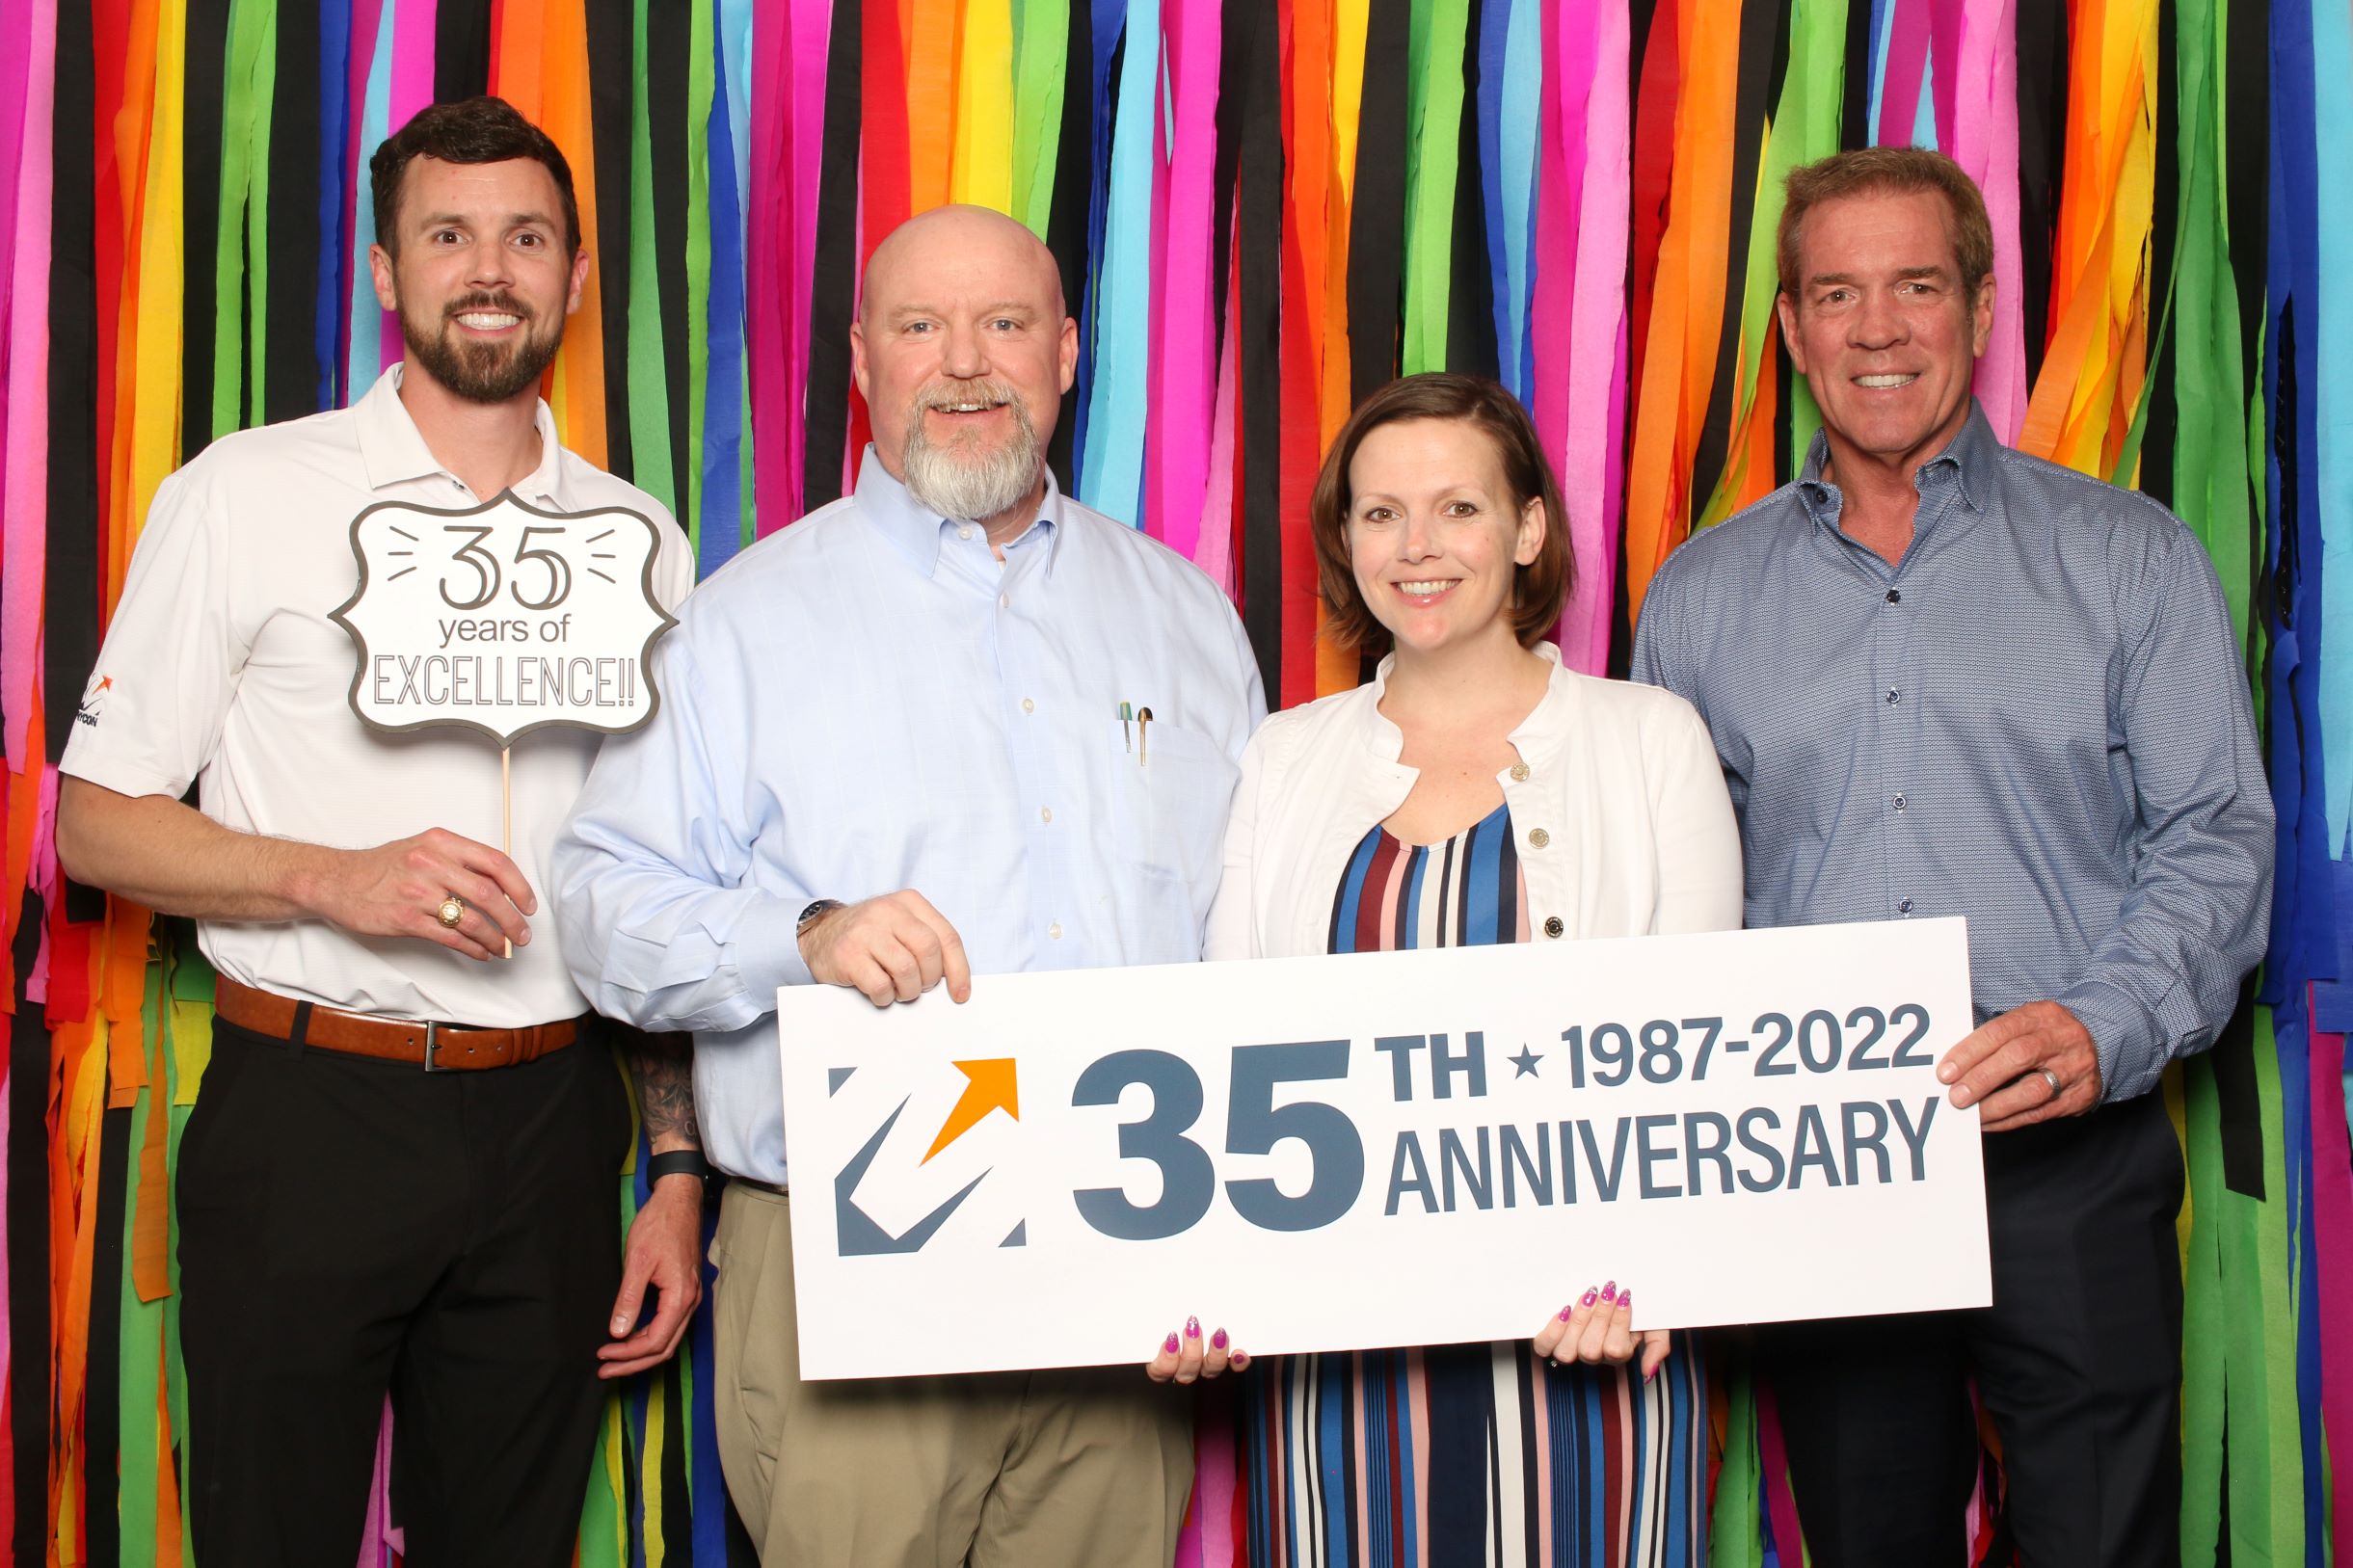 Four individuals posing with a sign celebrating a 35th anniversary, standing in front of a colorful striped background.